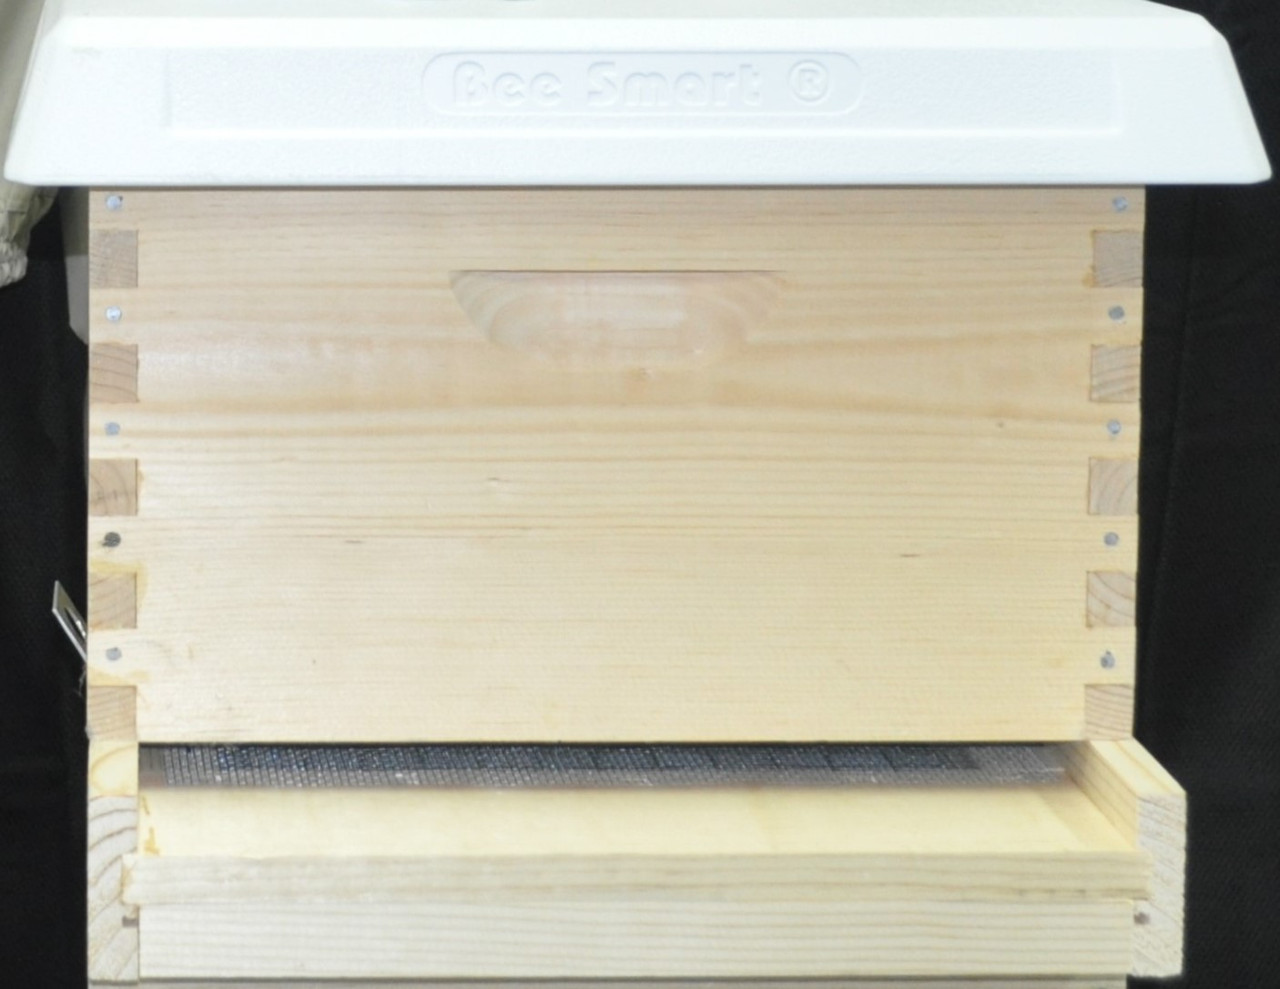 hive kit with plastic lid